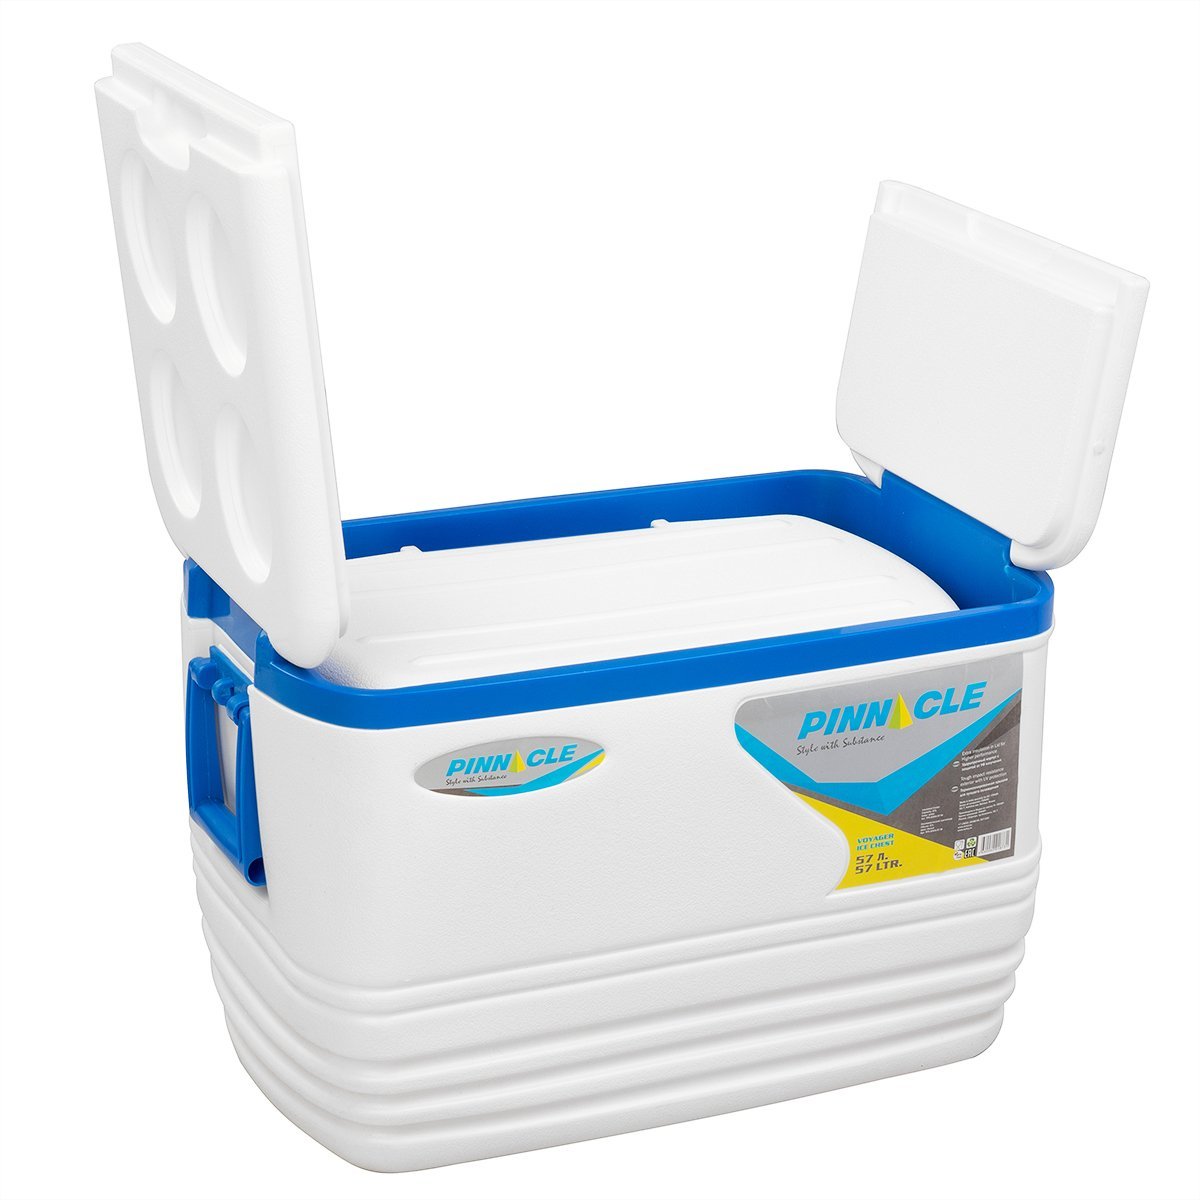 Voyager Large Ice Chest with Side Handle, Drain Plug and 6 Cup Holders, 60 qt with a lid widely open